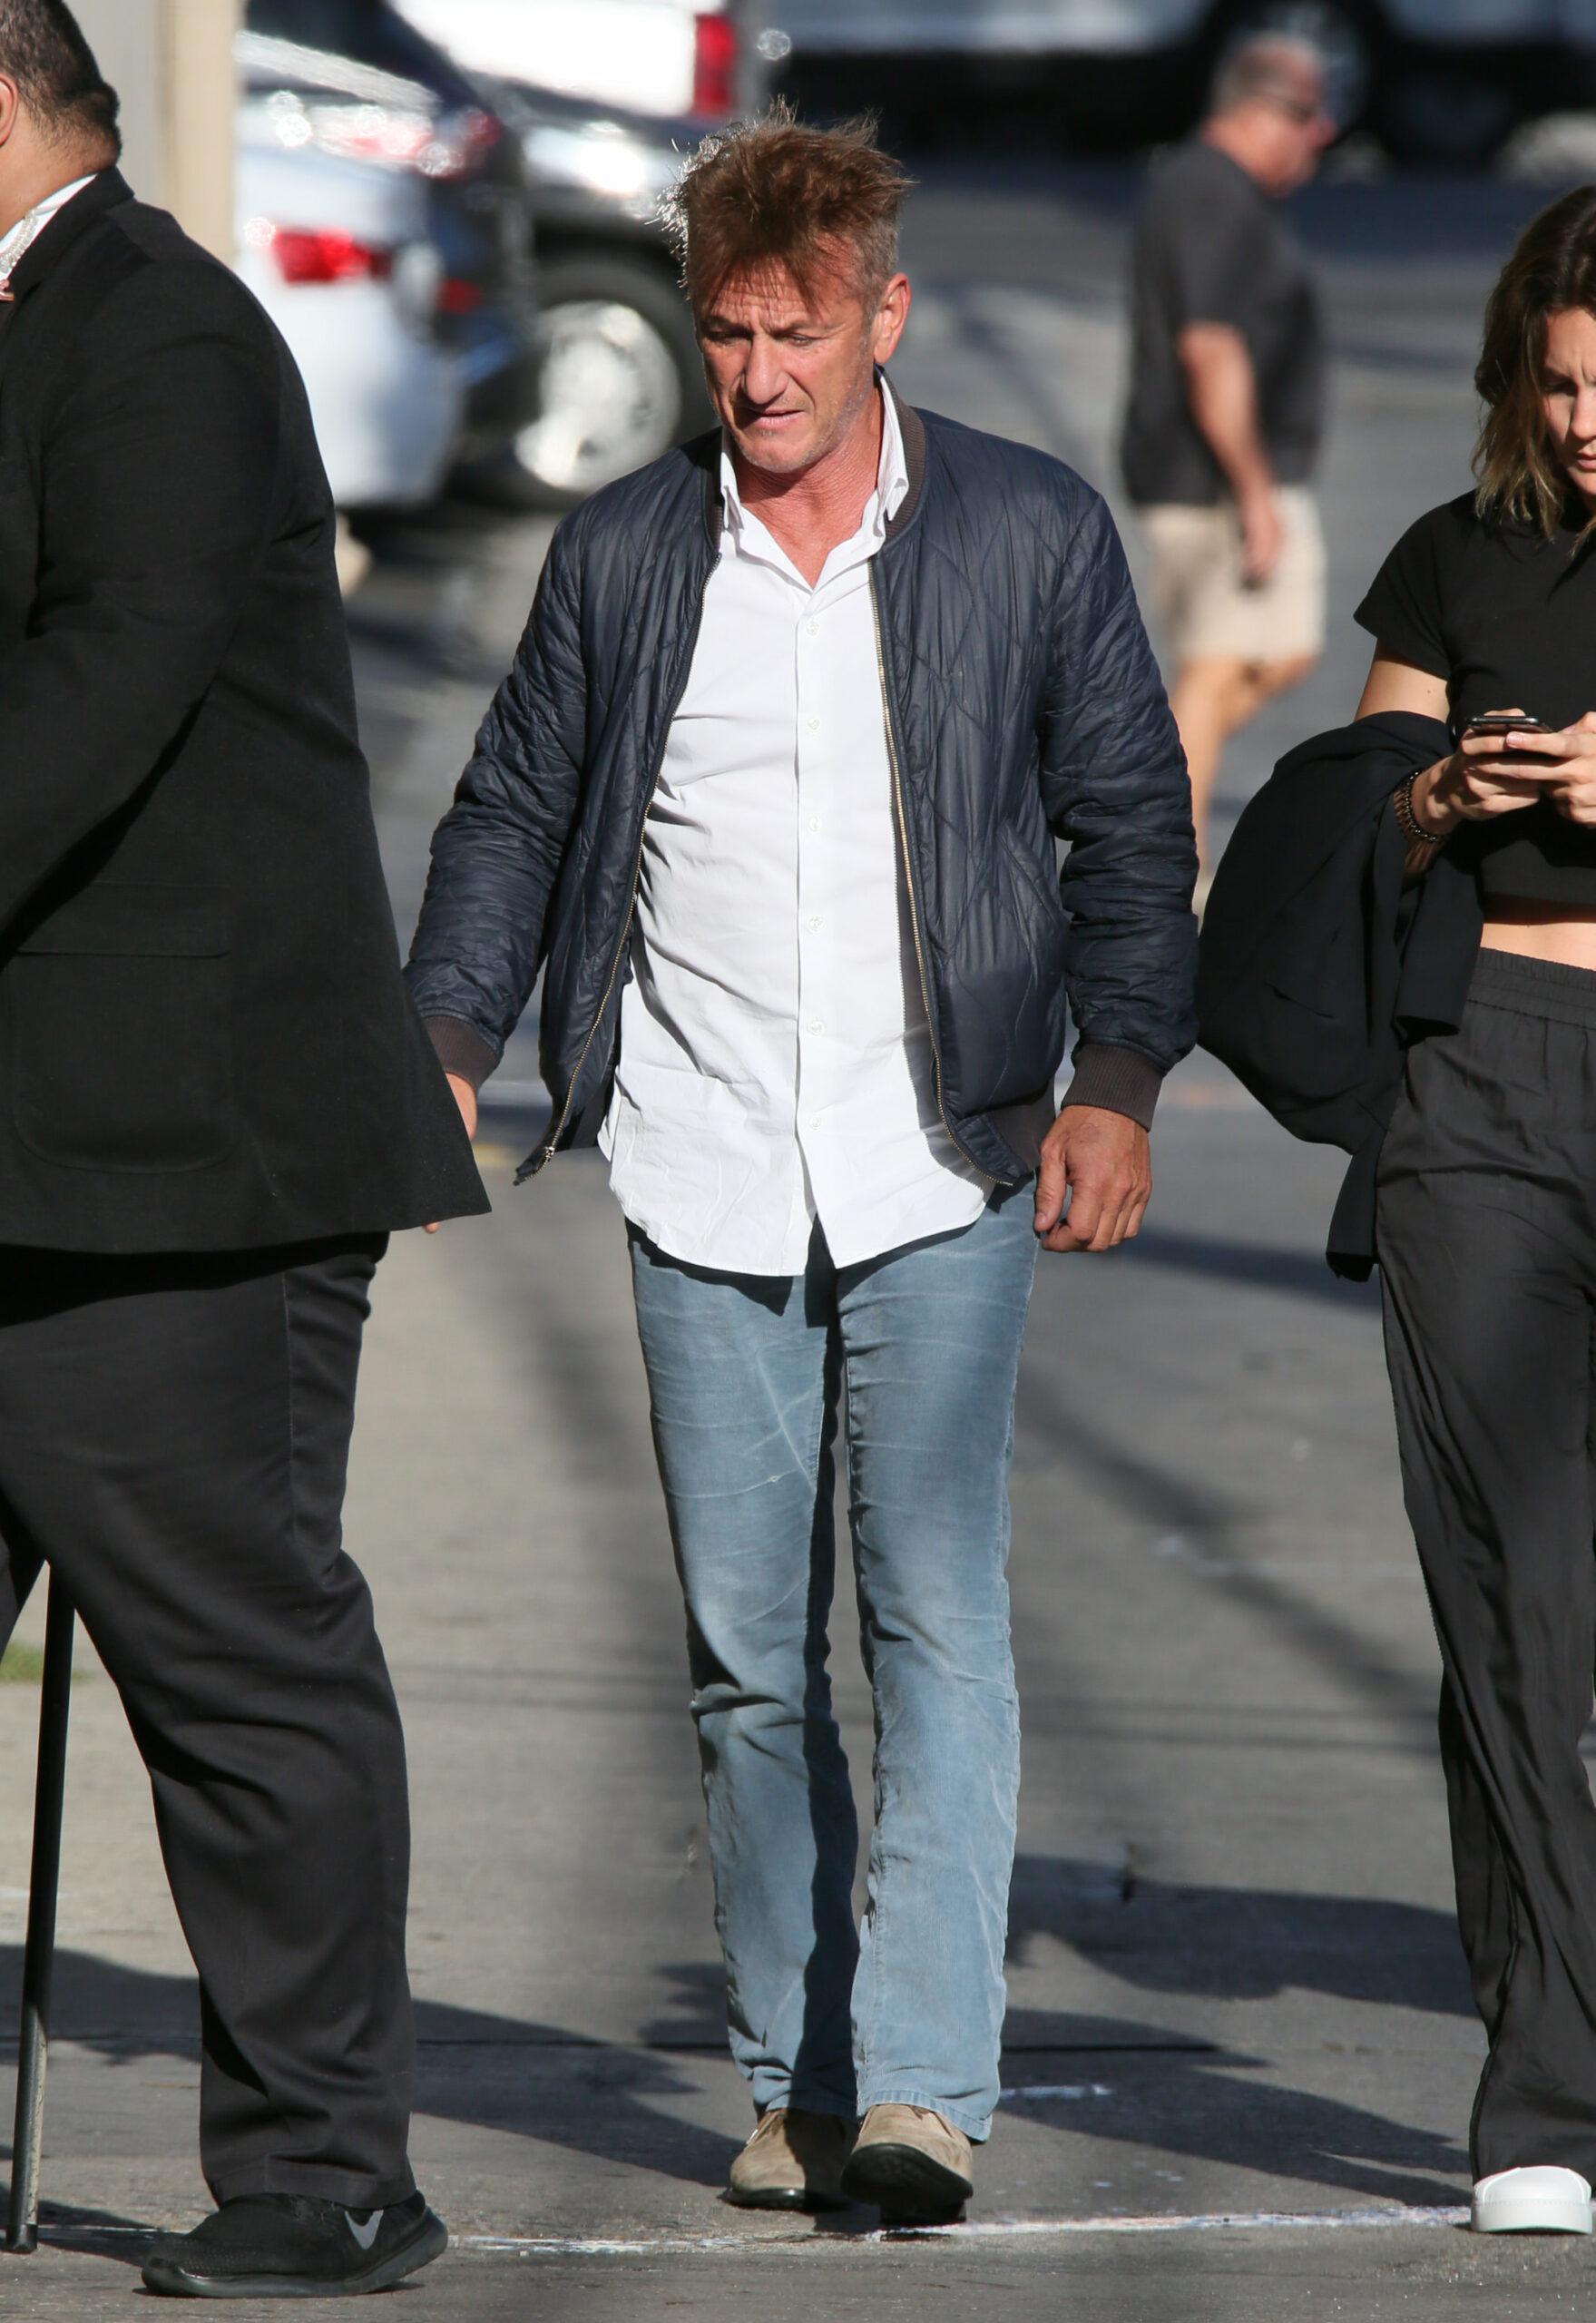 Sean Penn wants to go back to Ukraine to take up arms against Russia